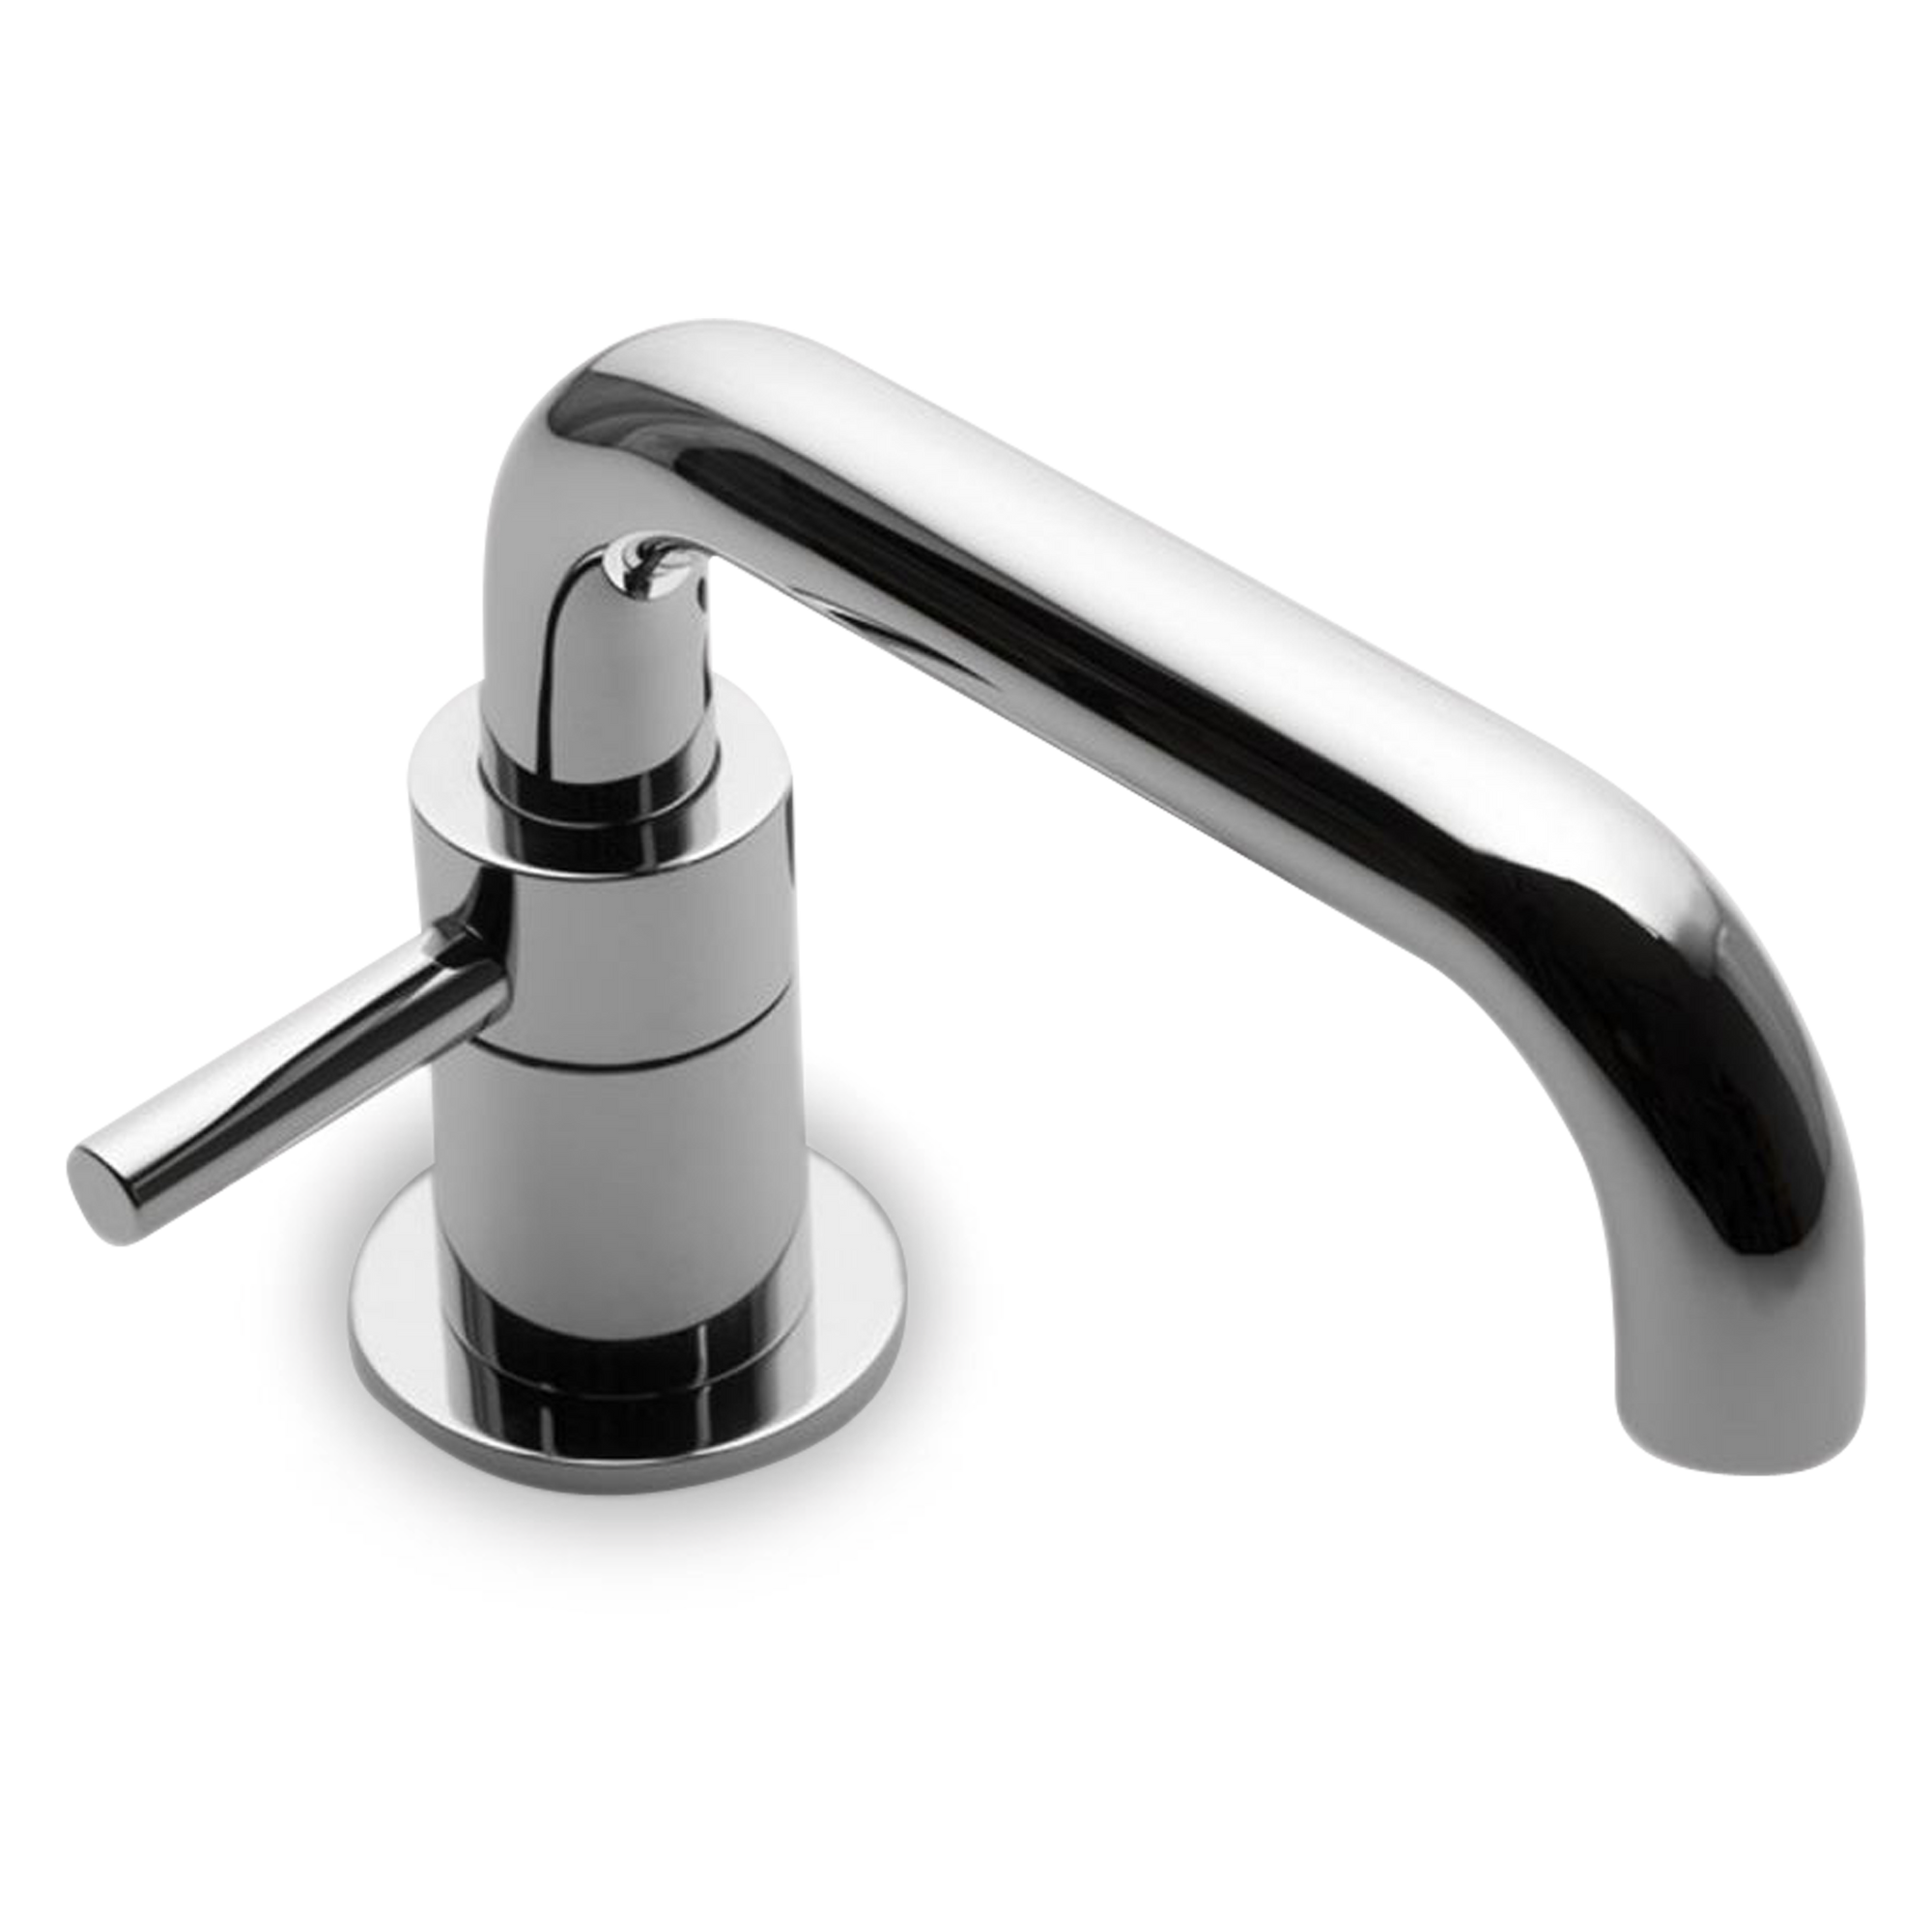 A contemporary faucet with single-lever operation.